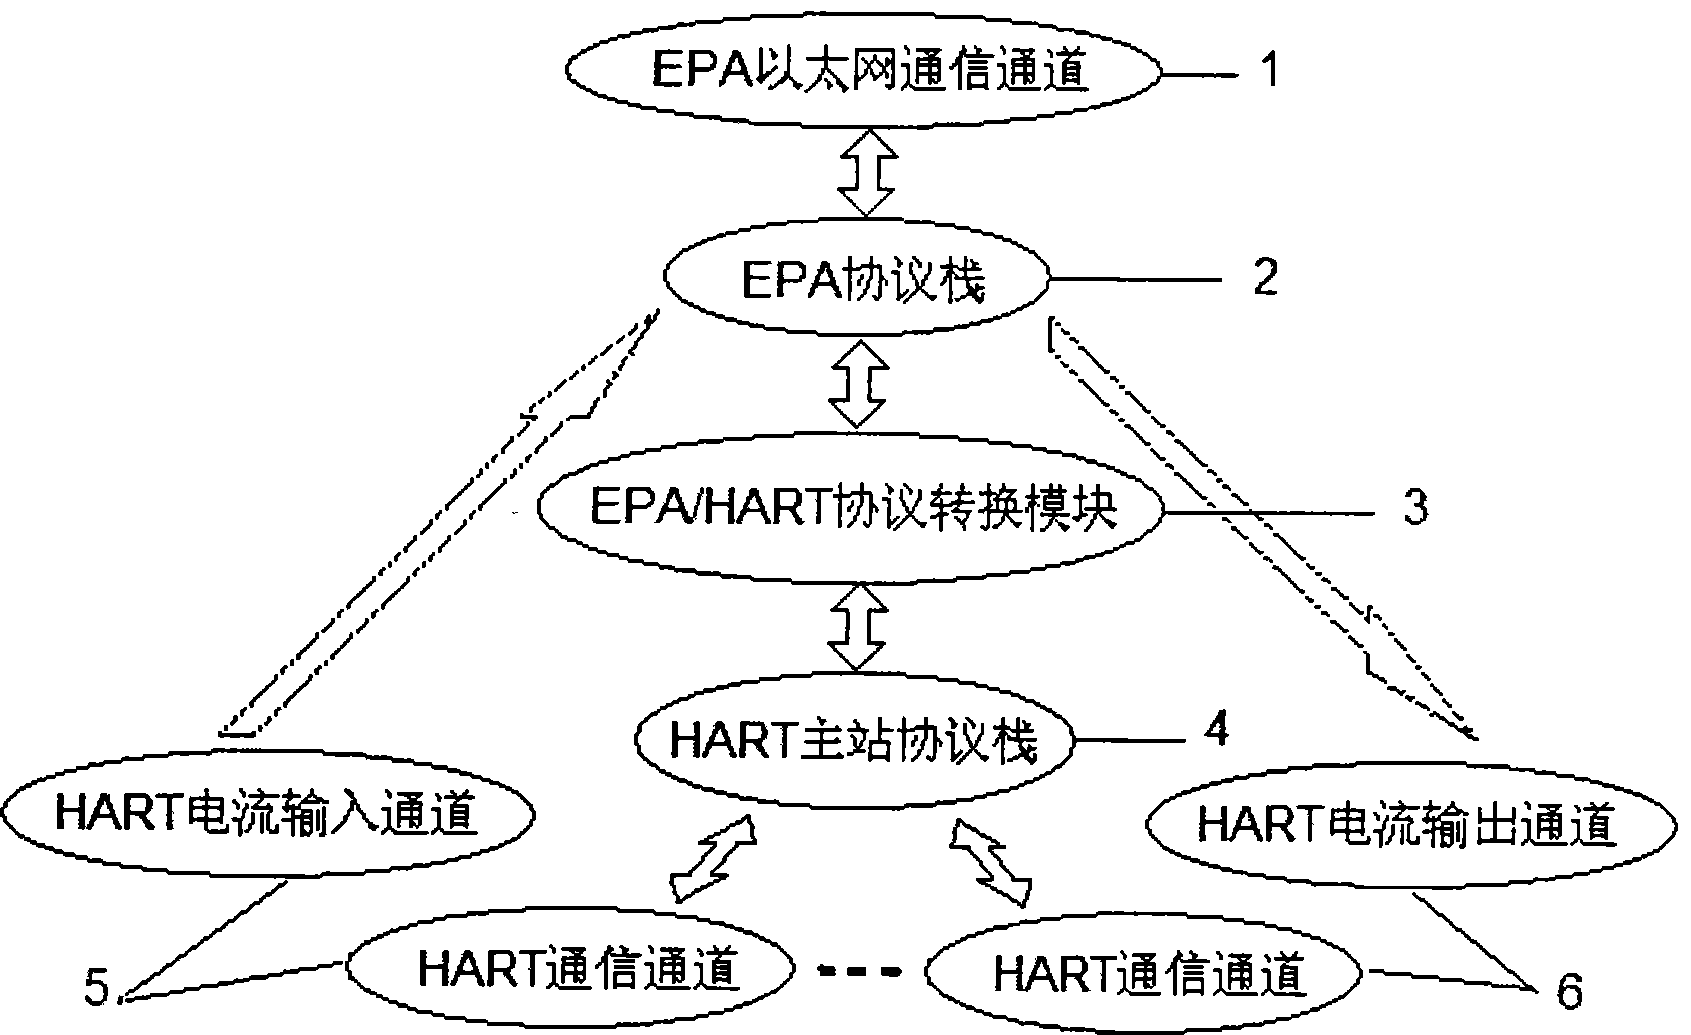 EPA industrial Ethernet and HART field bus interconnection method